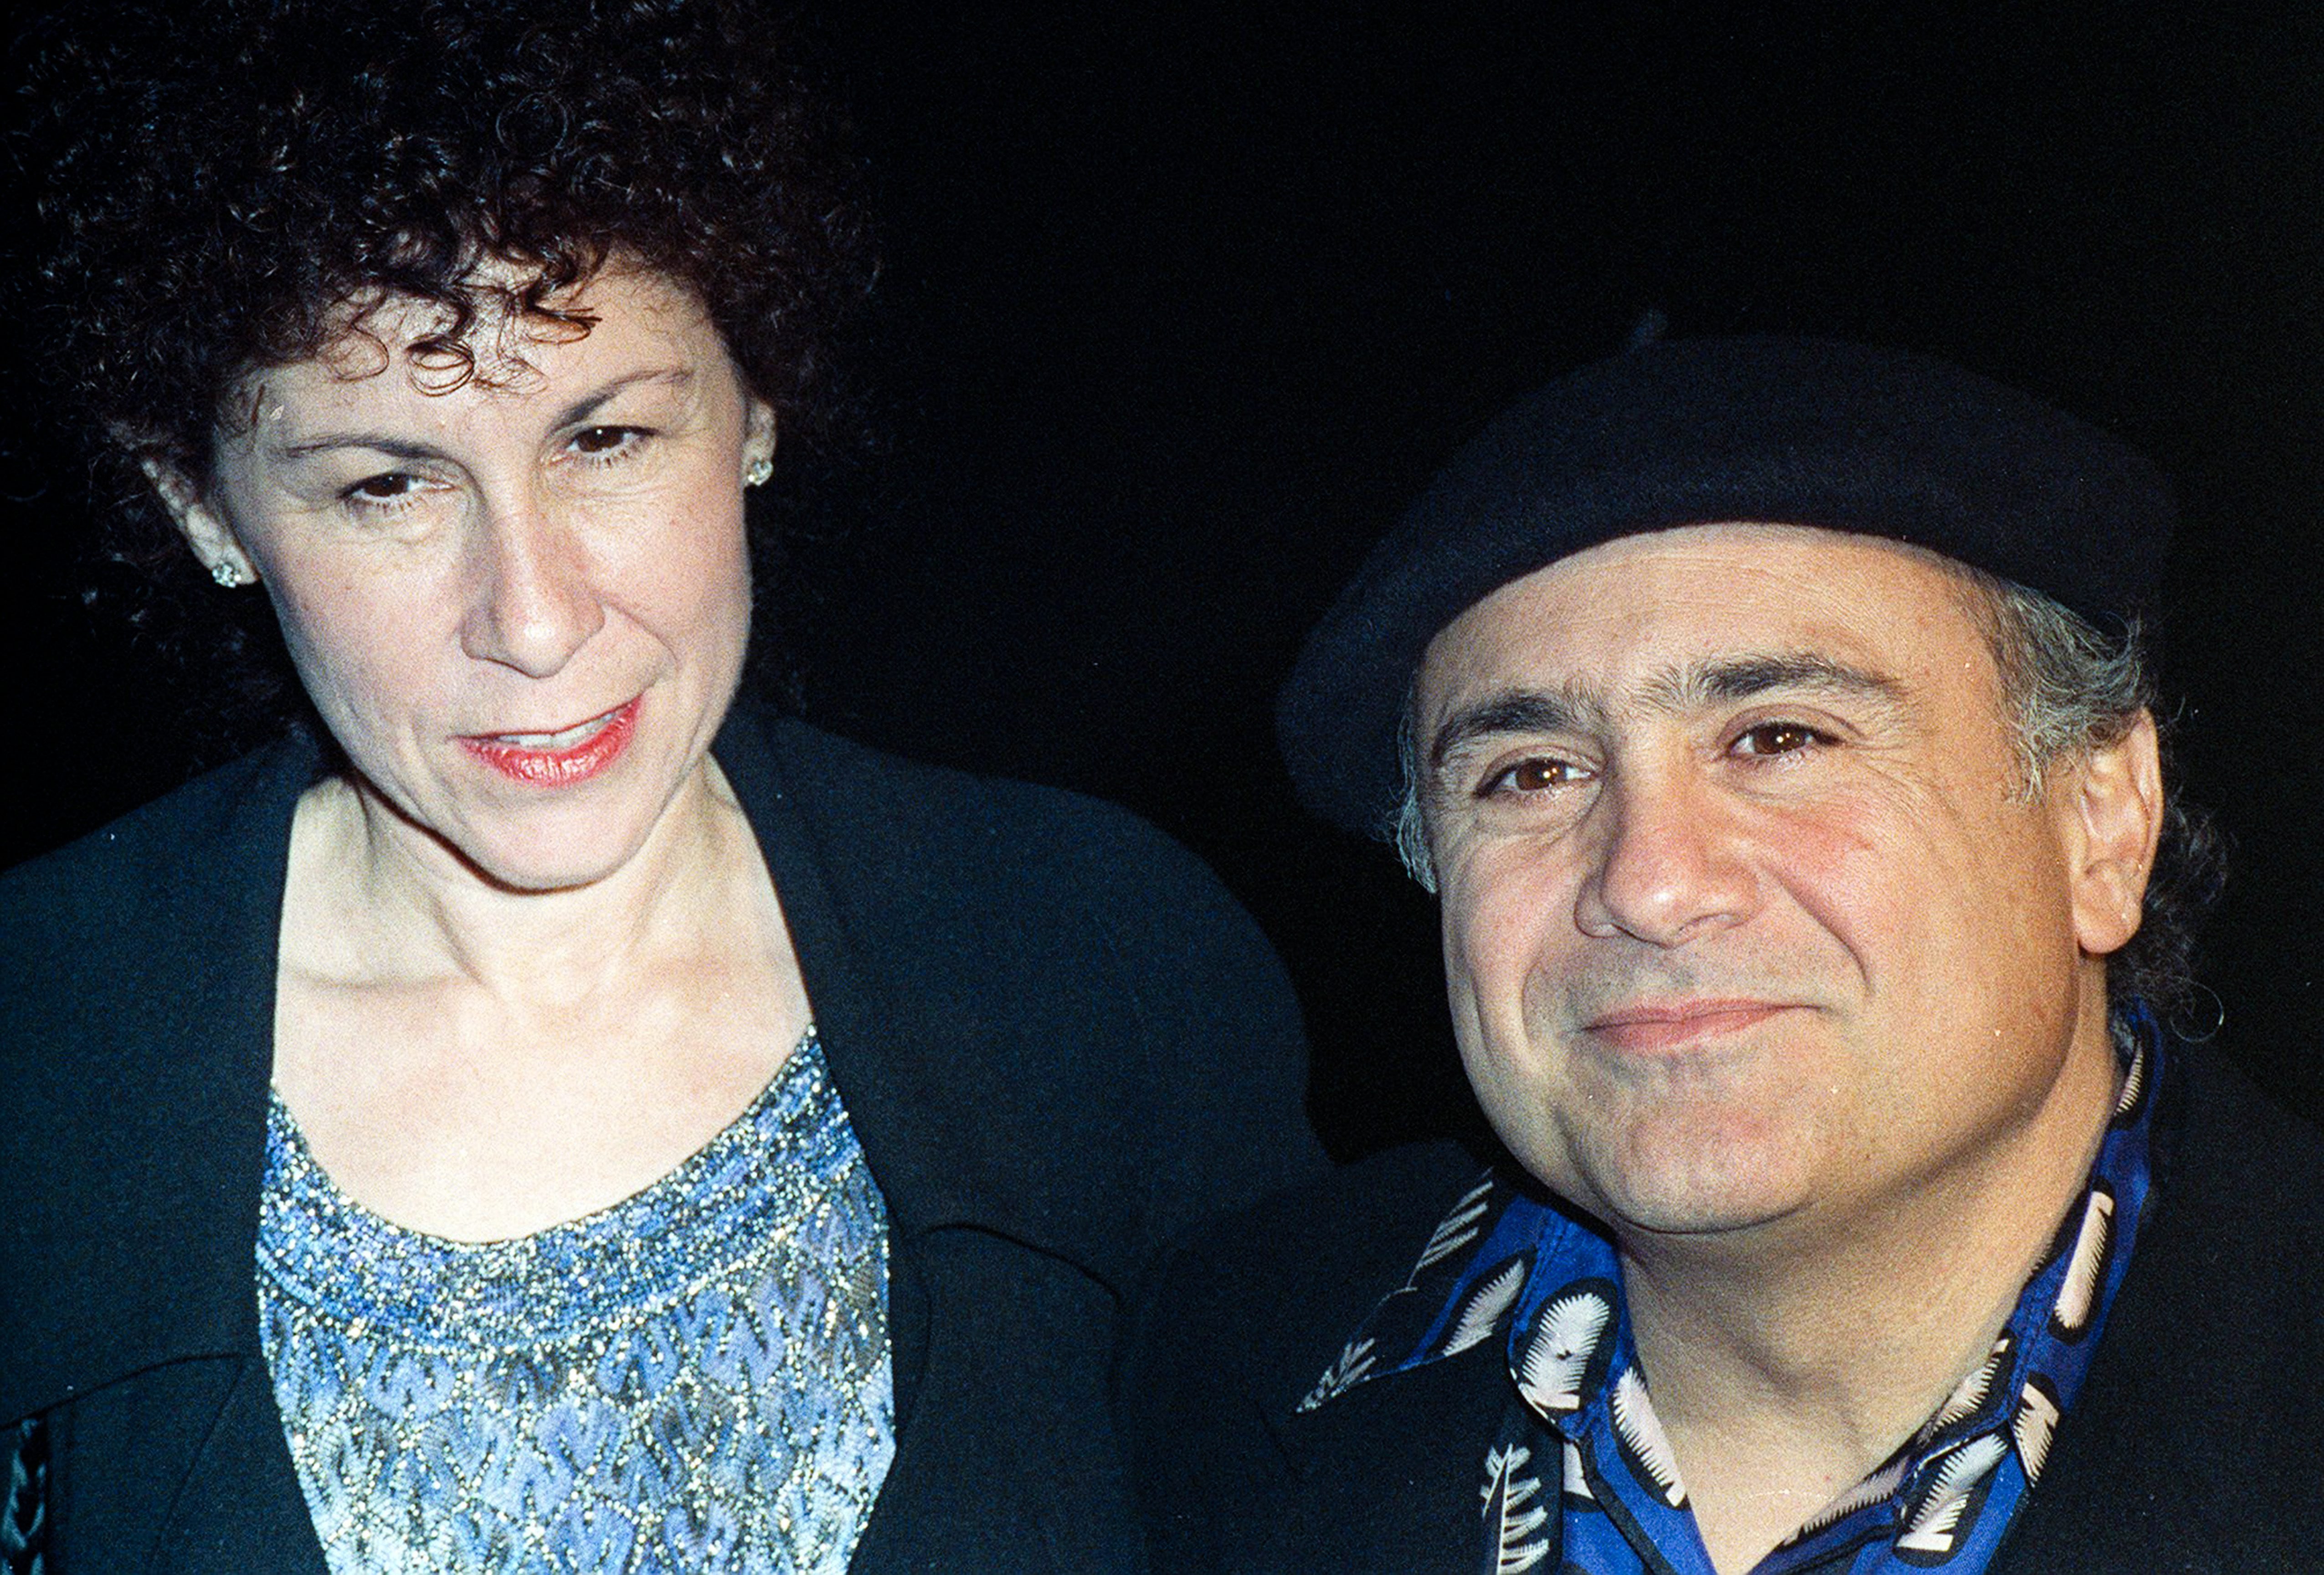 Danny DeVito with his wife, actress Rhea Perlman, circa 1990 | Photo: GettyImages